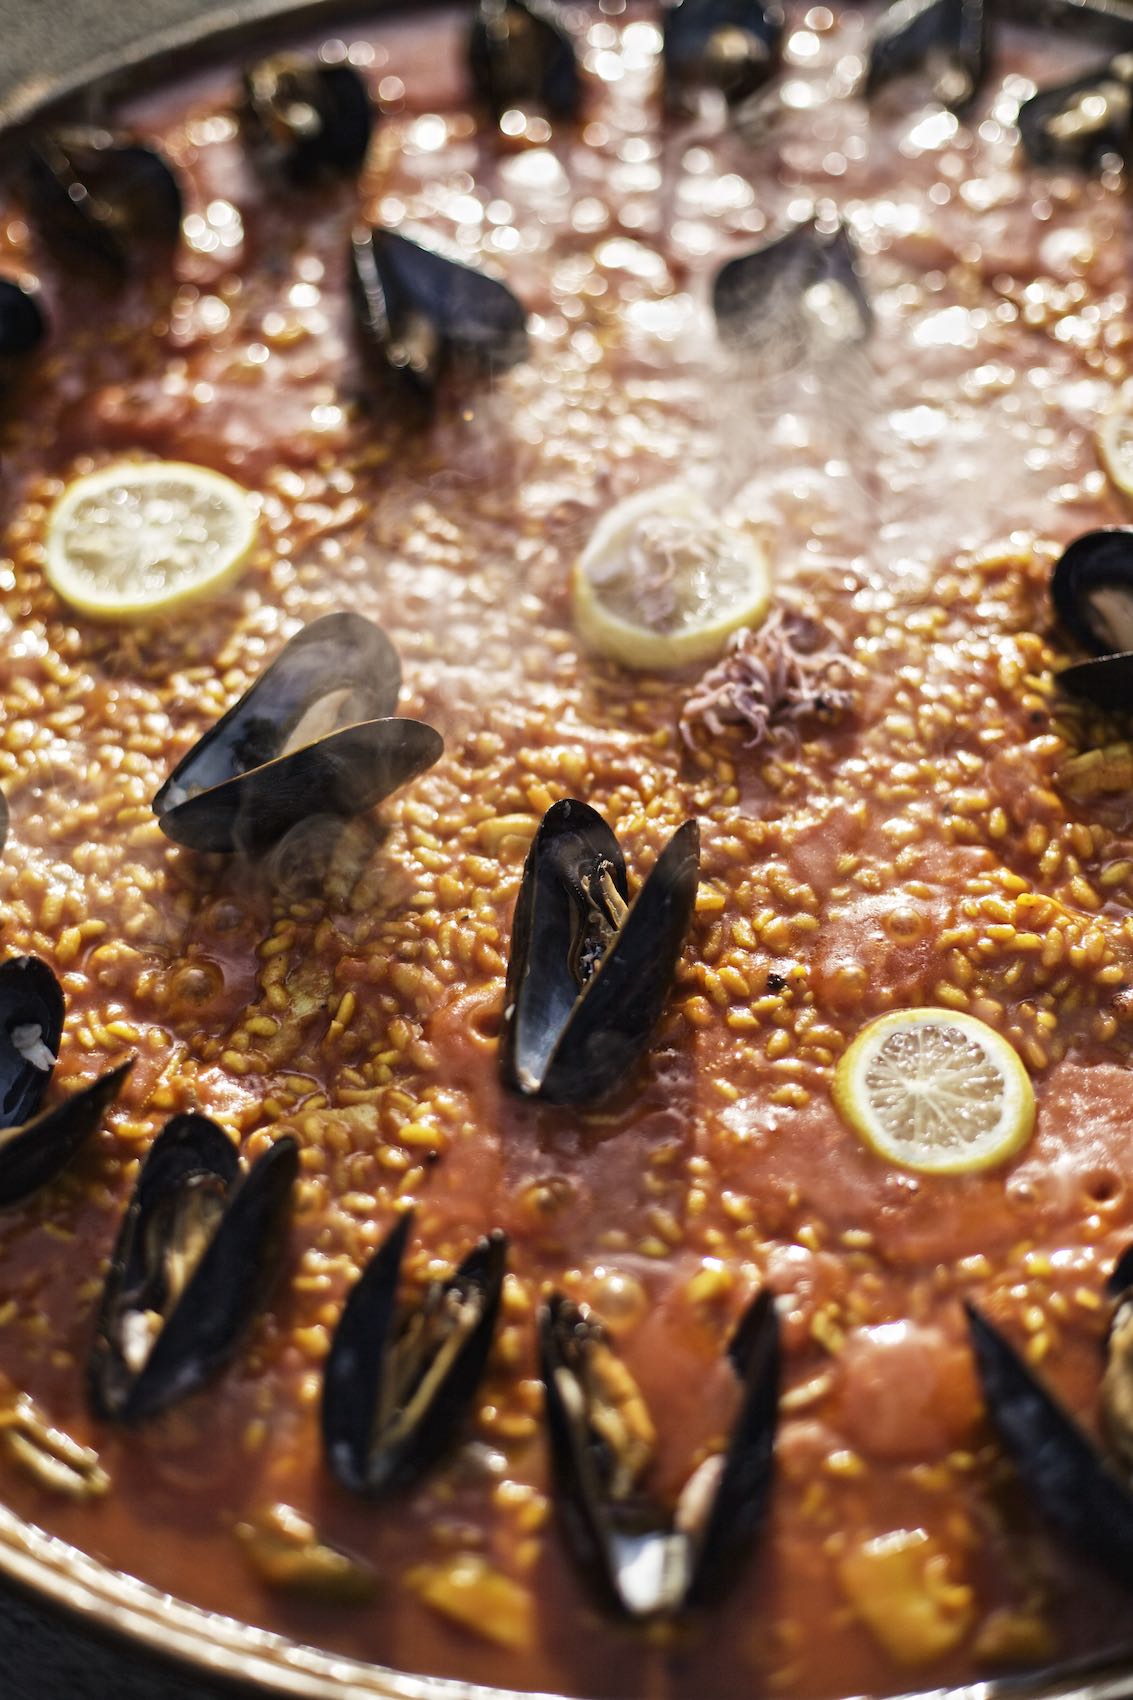 Jody Horton Photography - Steaming paella with mussels and lemon slices. 